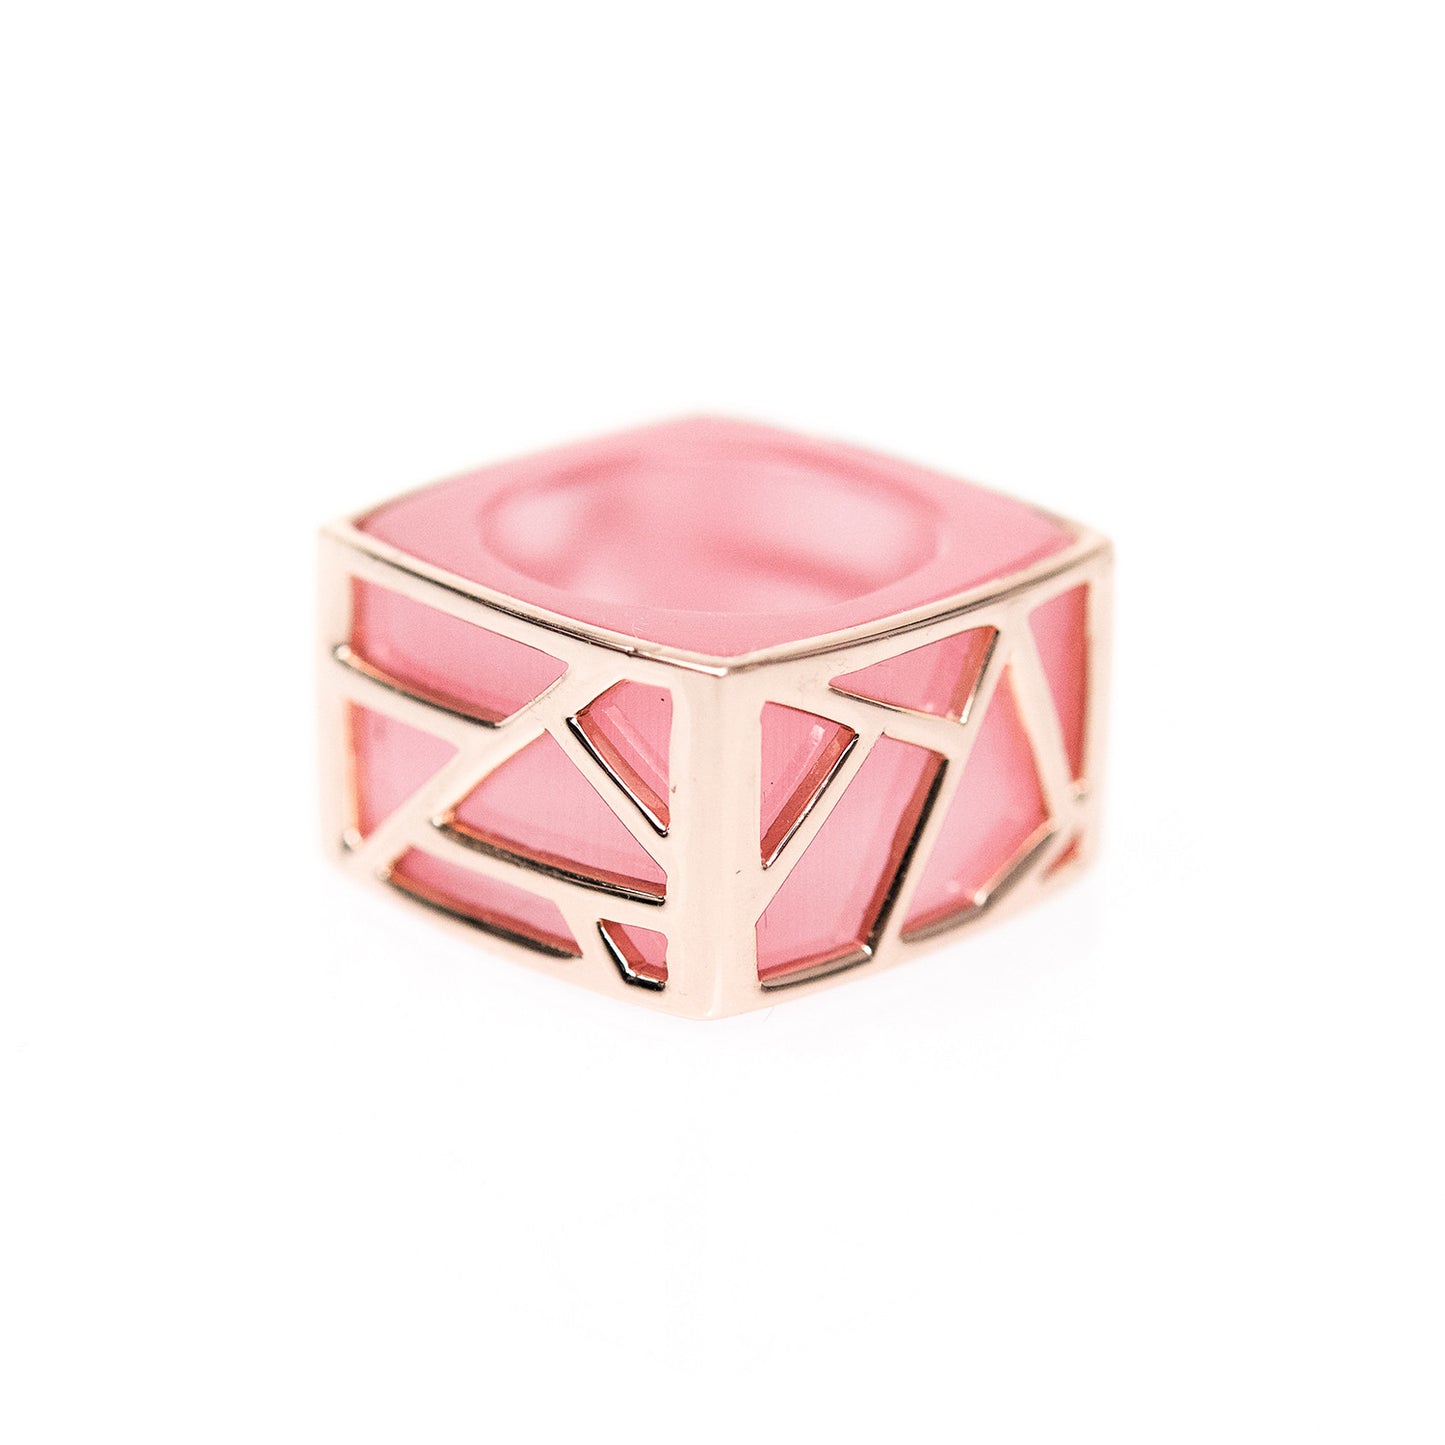 Lattice Square Cocktail Ring - pink cat's eye